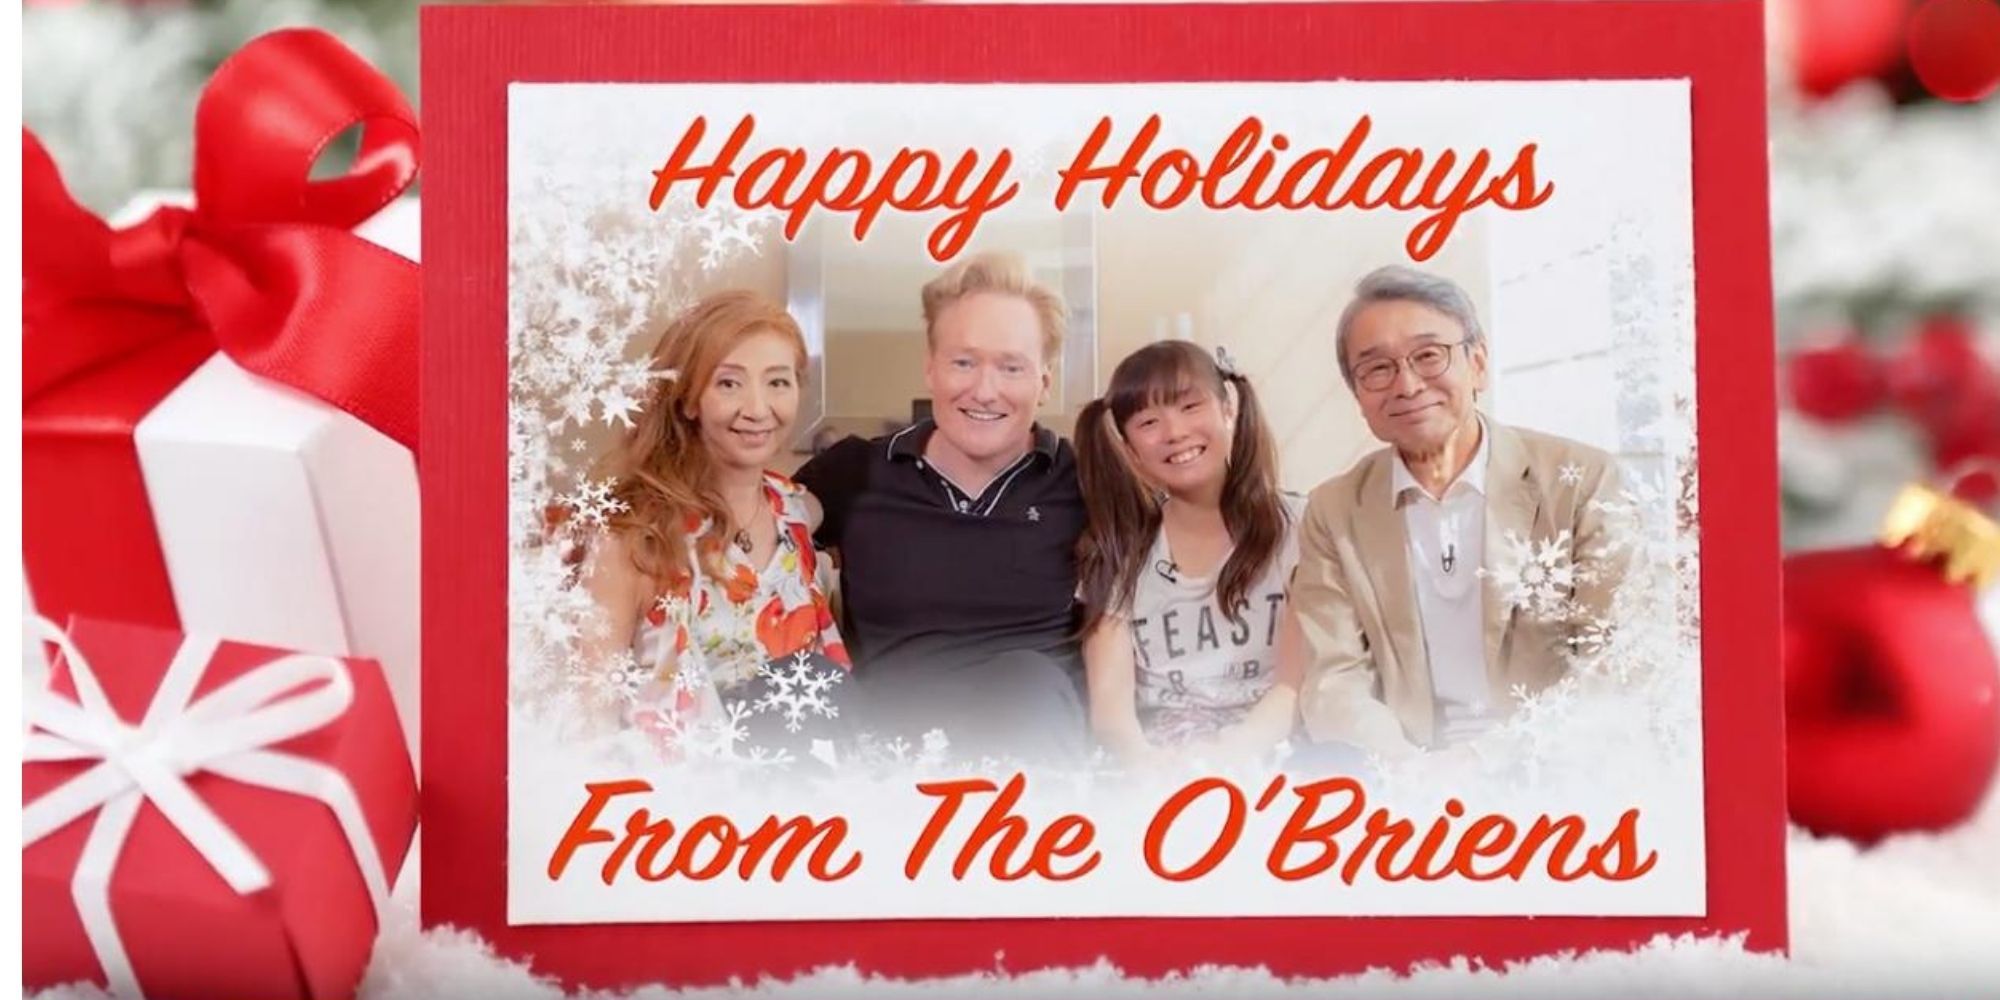 Conan Without Borders Japan with Conan and his rented family members